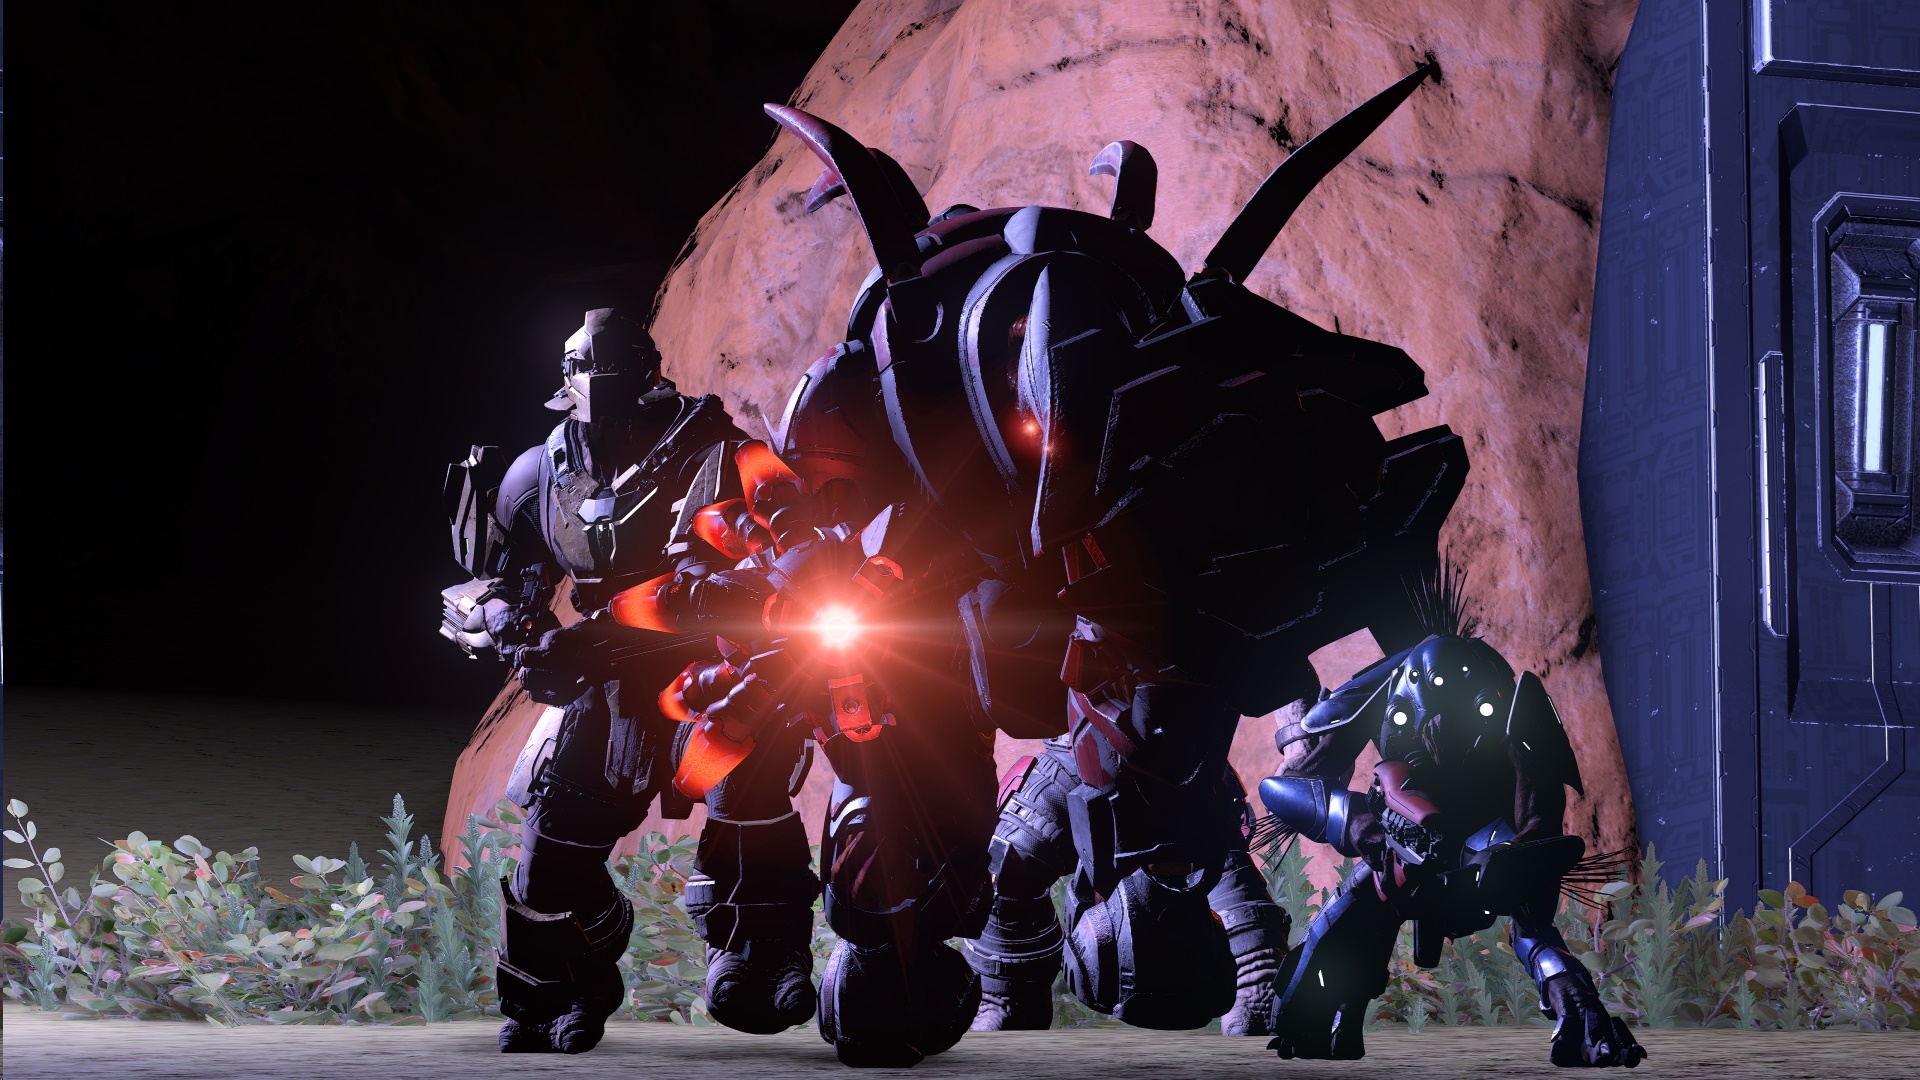 Halo Infinite screenshot of (from left-to-right) a Brute, Hunter, and Jackal on a dark map